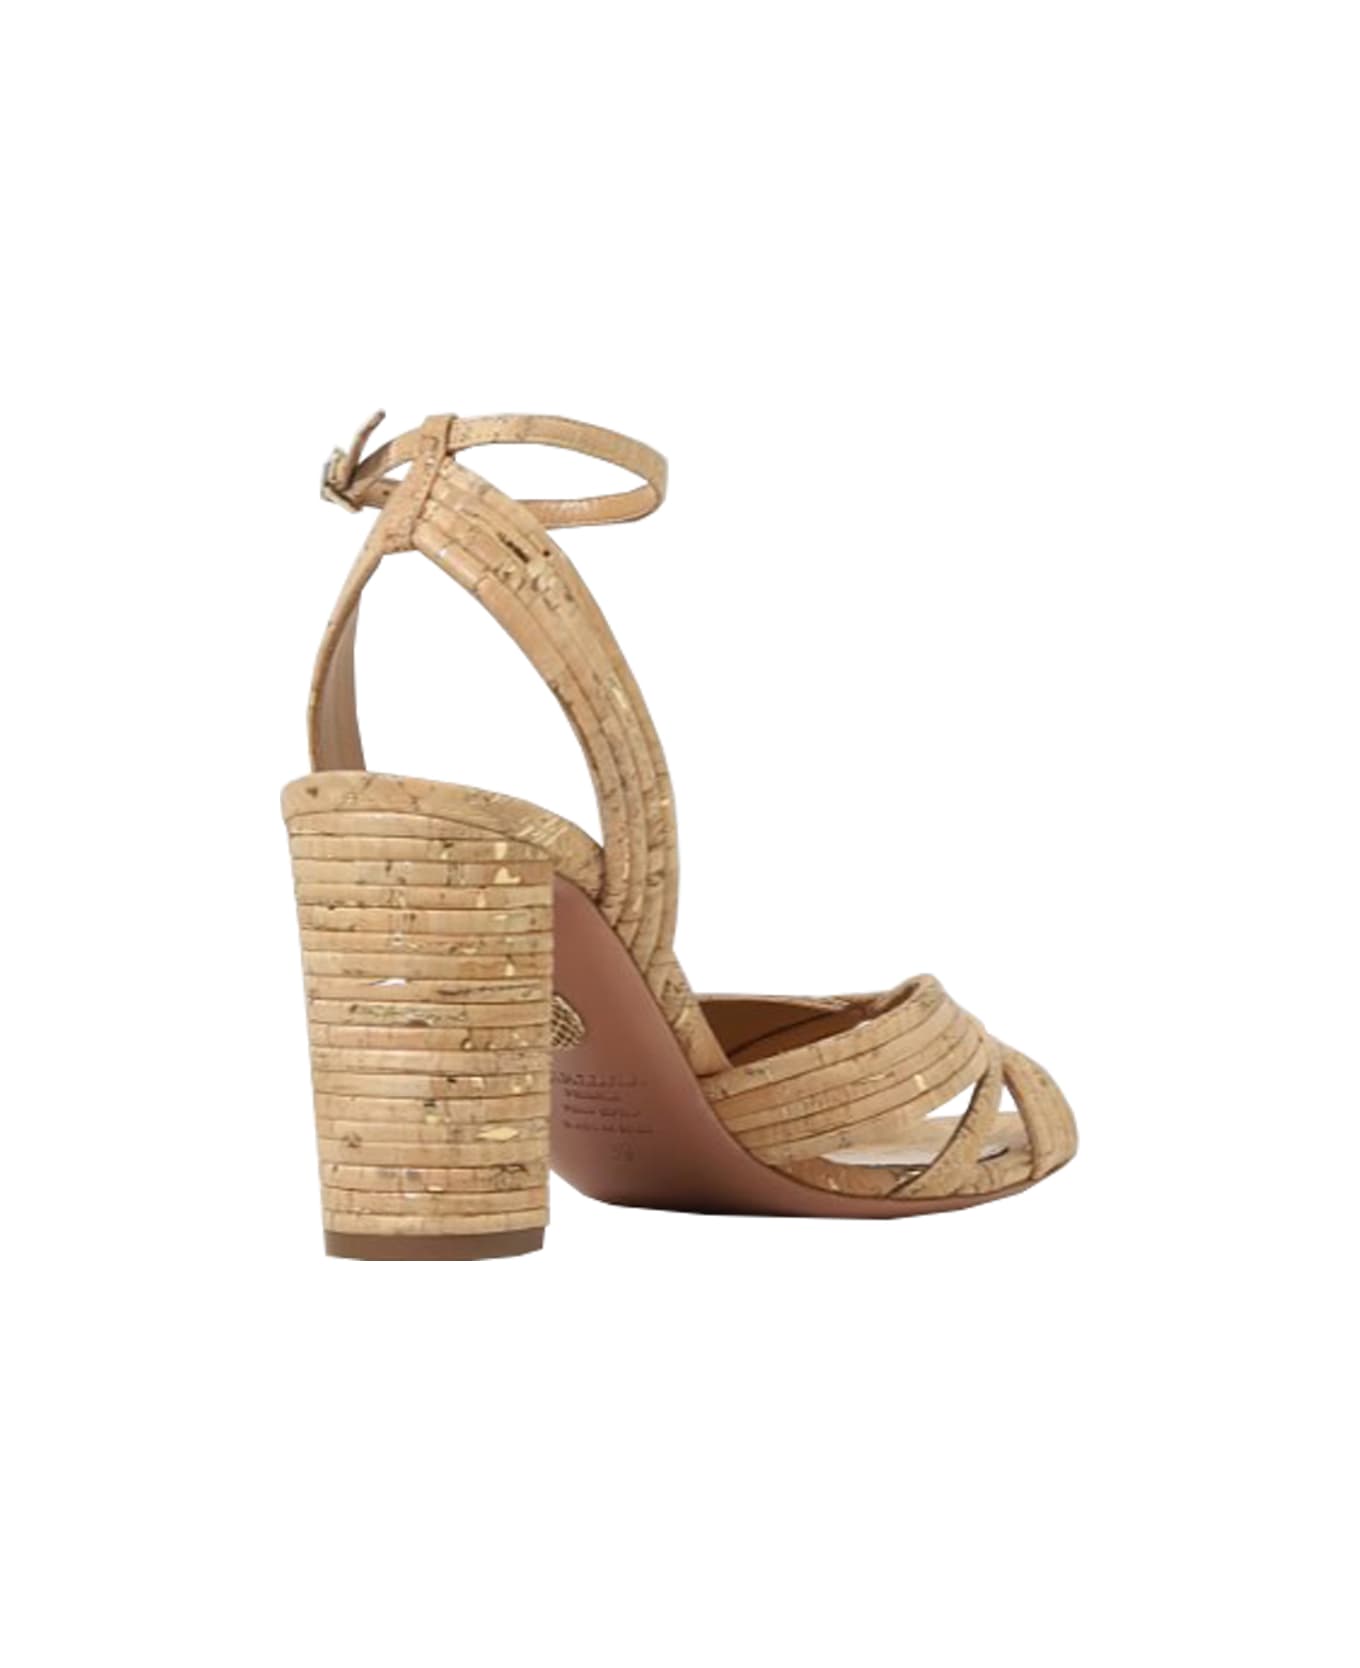 Aquazzura There Shoes With Heel - Golden